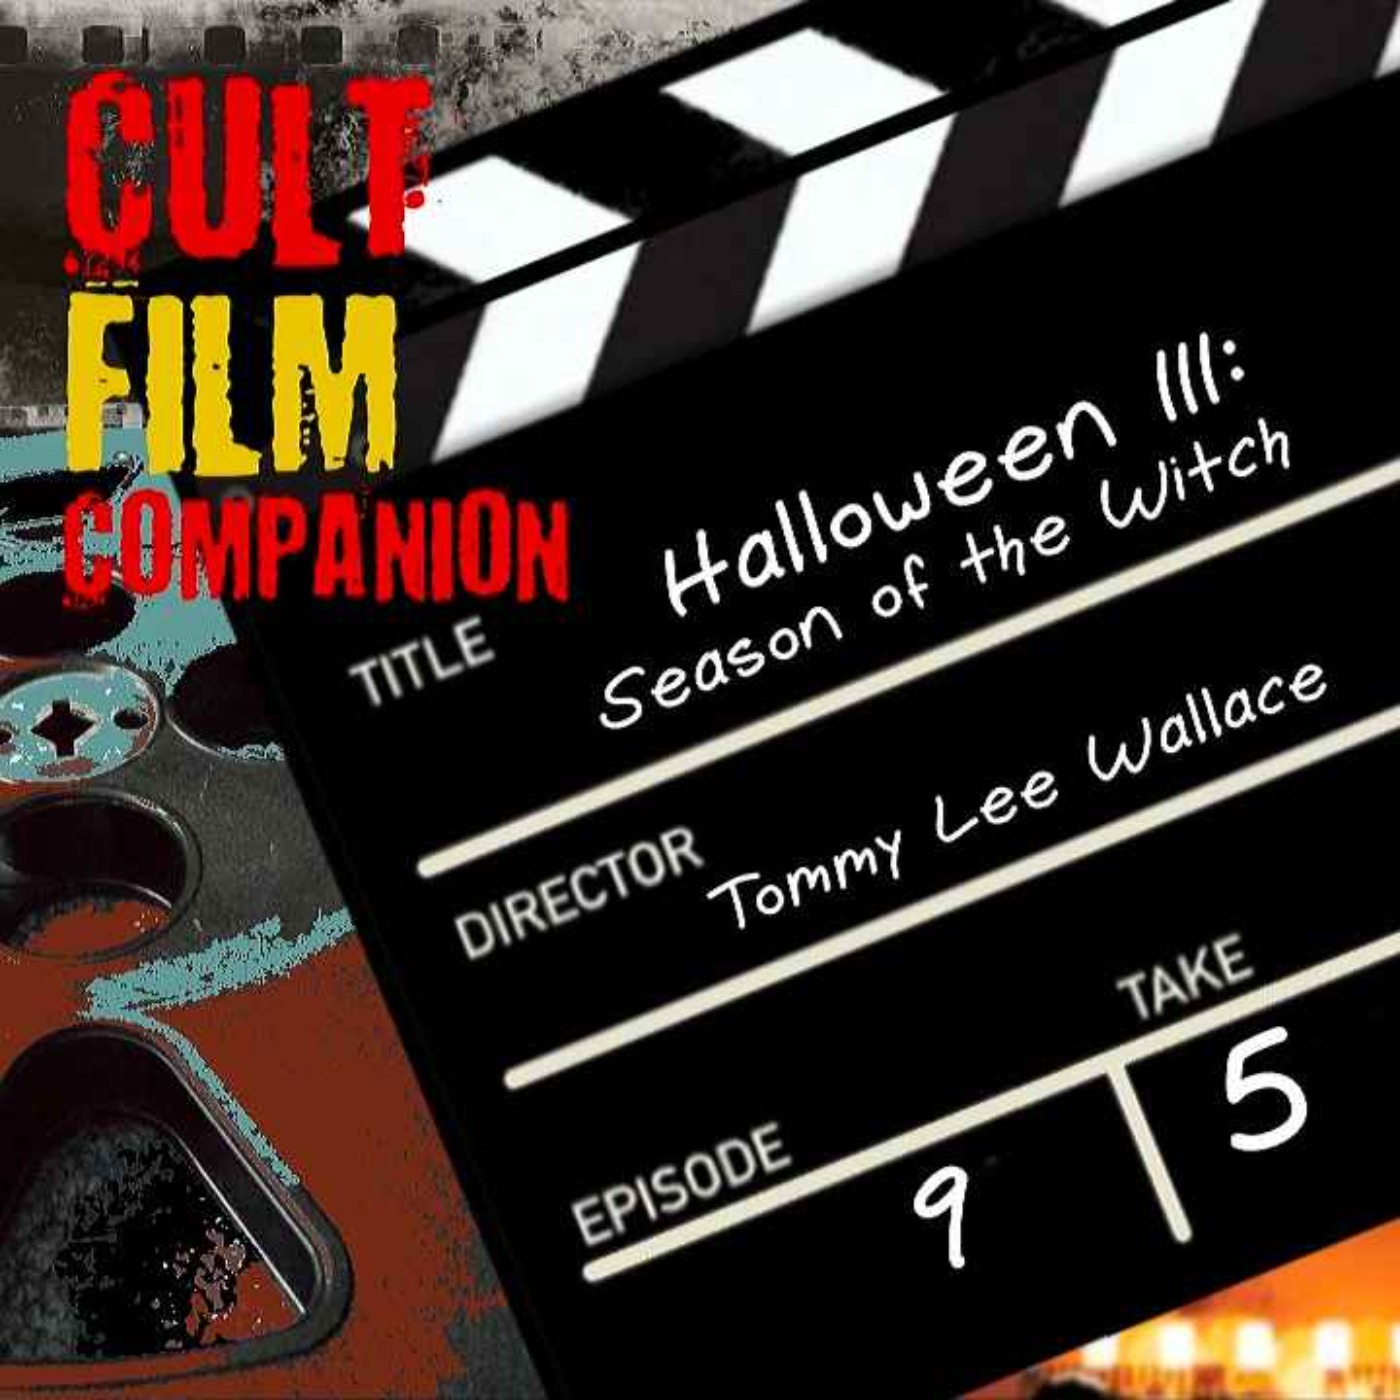 Ep. 9 Halloween III: Season of the Witch directed by Tommy Lee Wallace